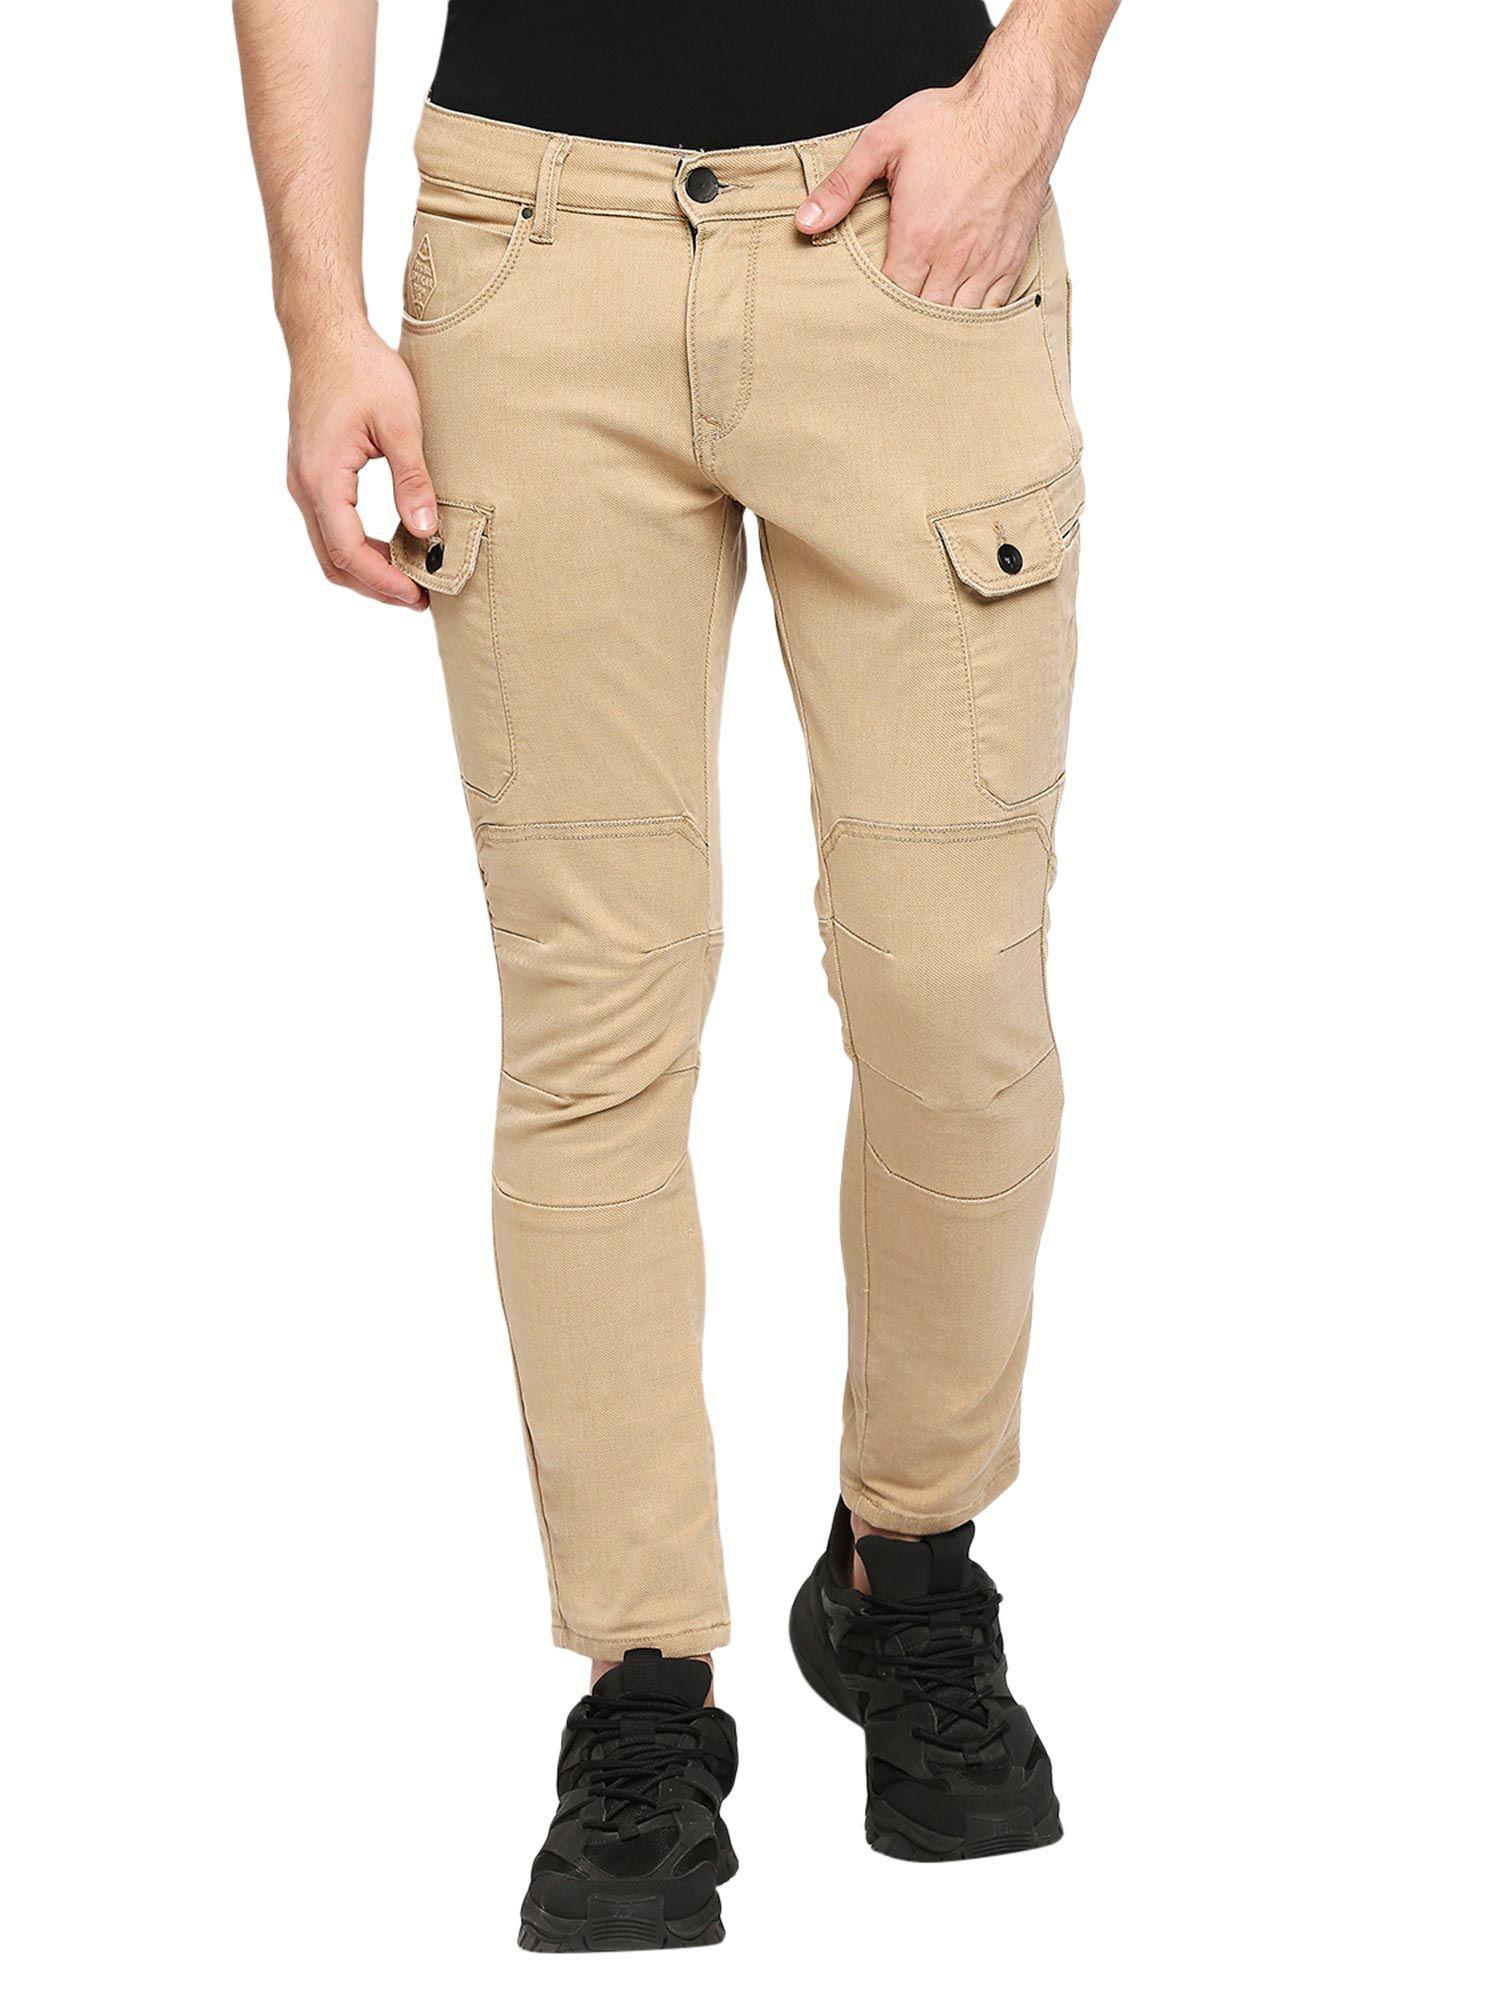 men's tapered fit washed khaki jeans